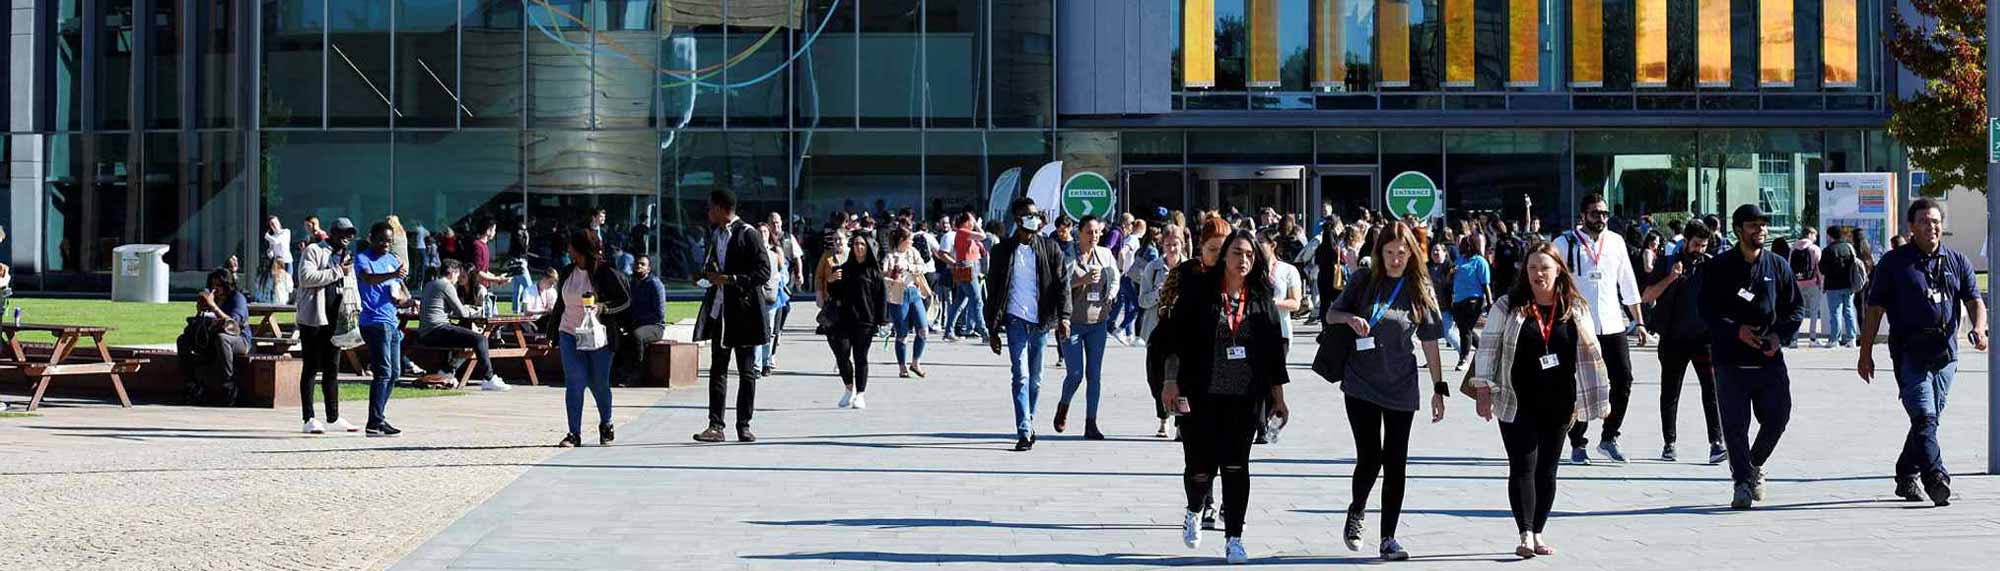 Students walking around campus in a University open day